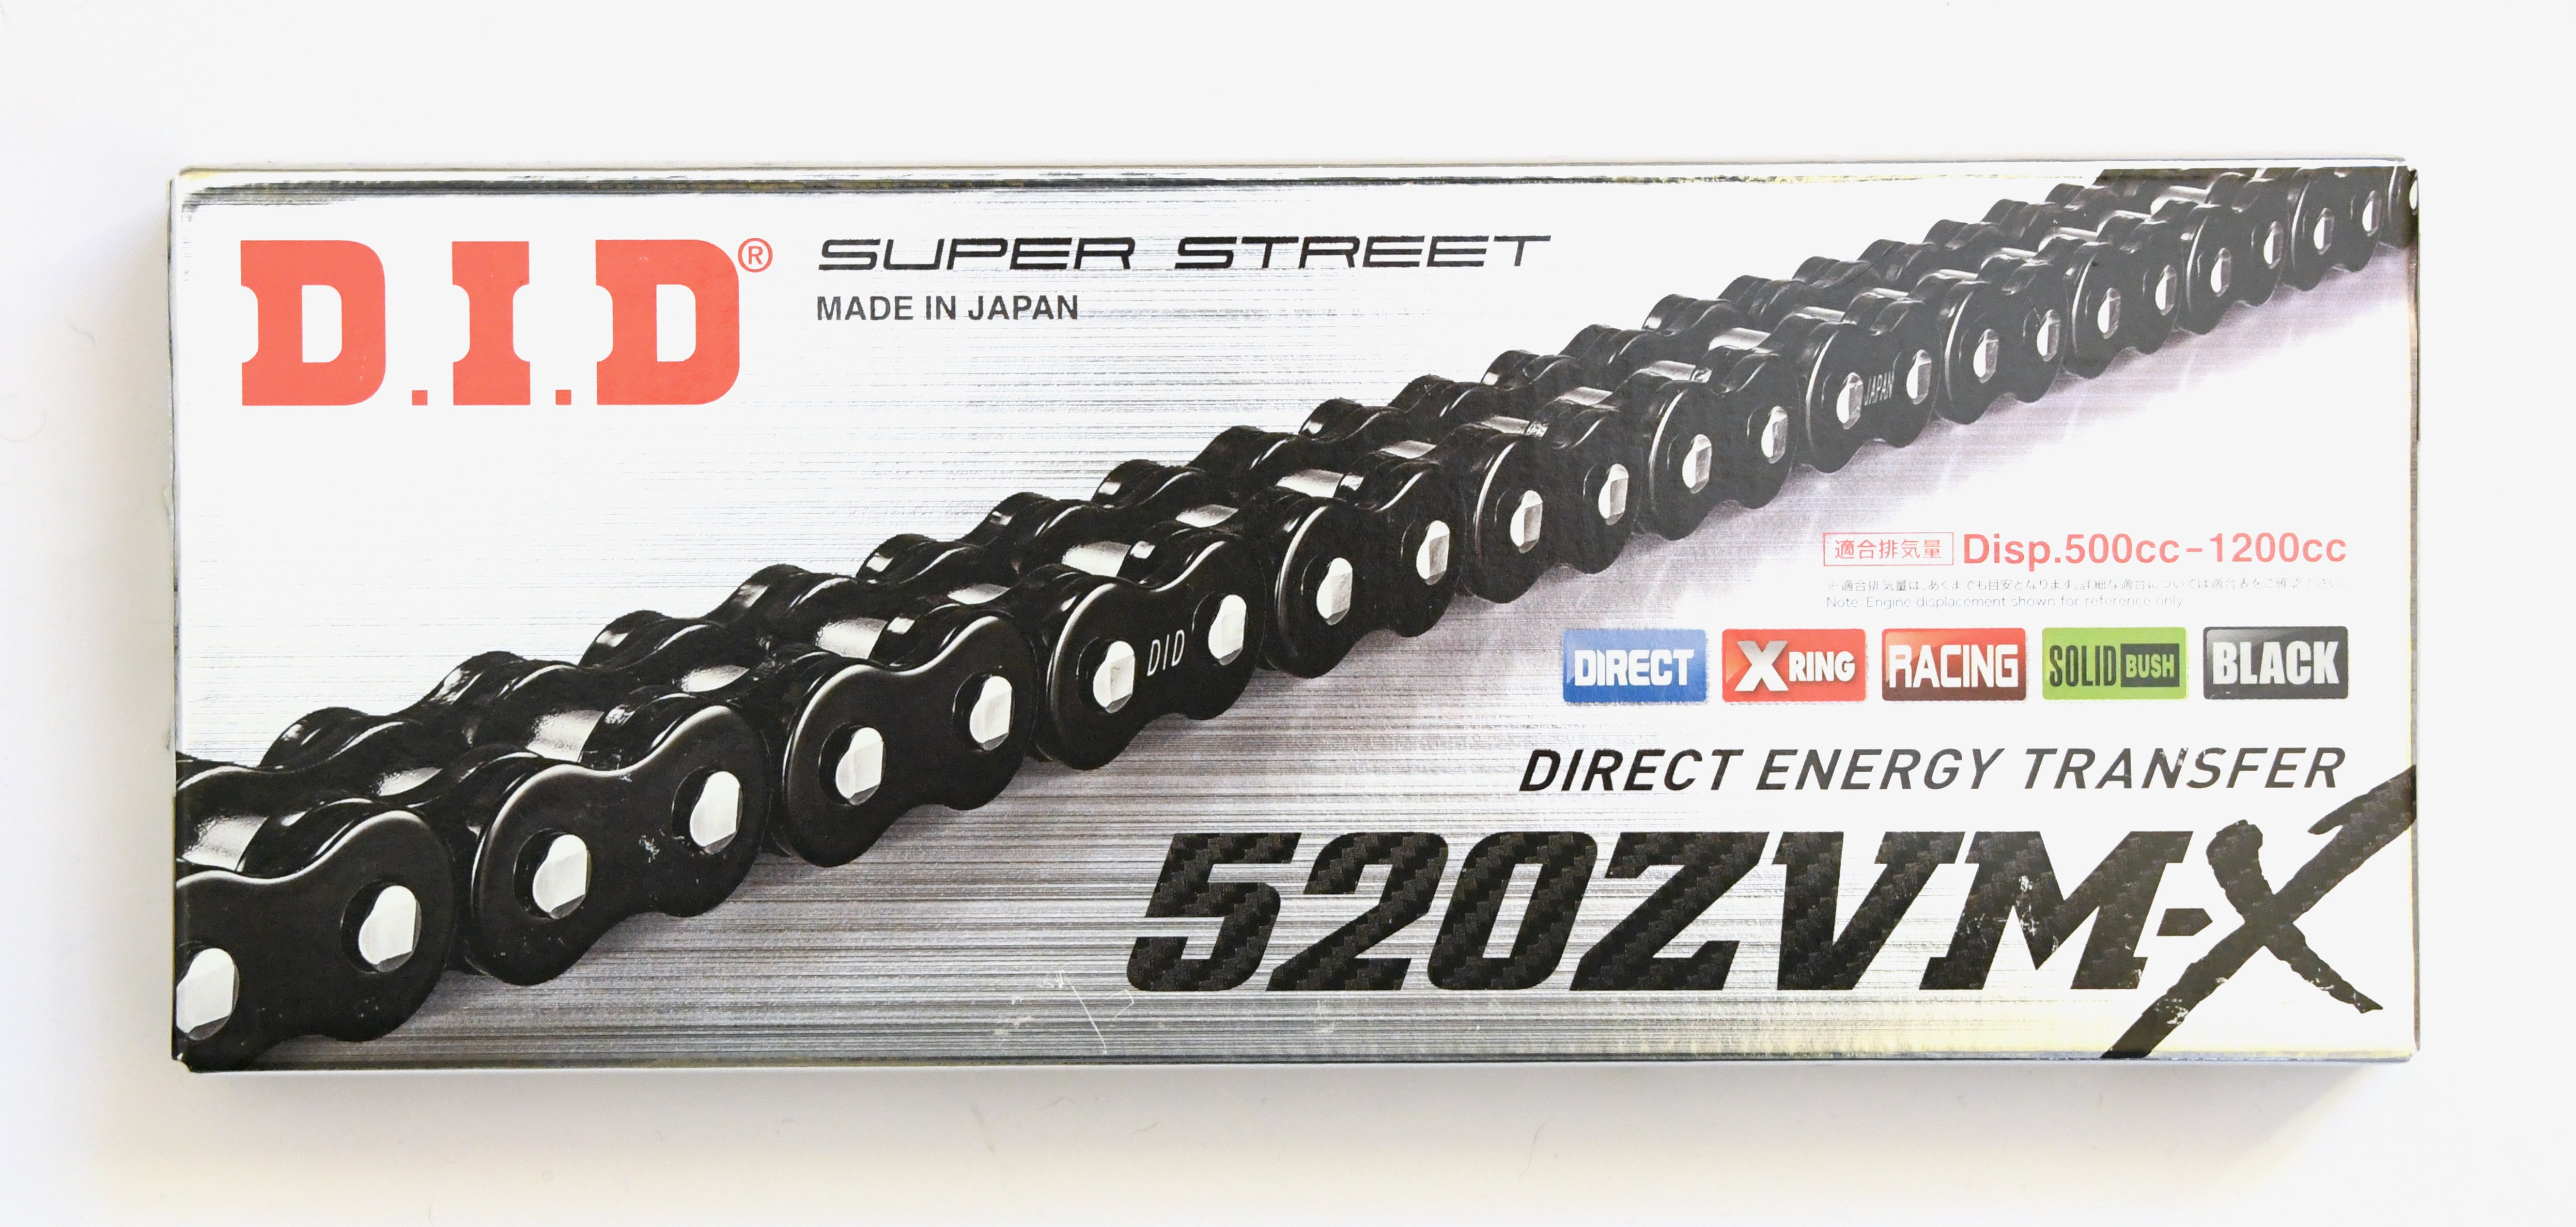 DID 520 ZVMX Super Street Extra Heavy Duty Chain 116 Links - Gold